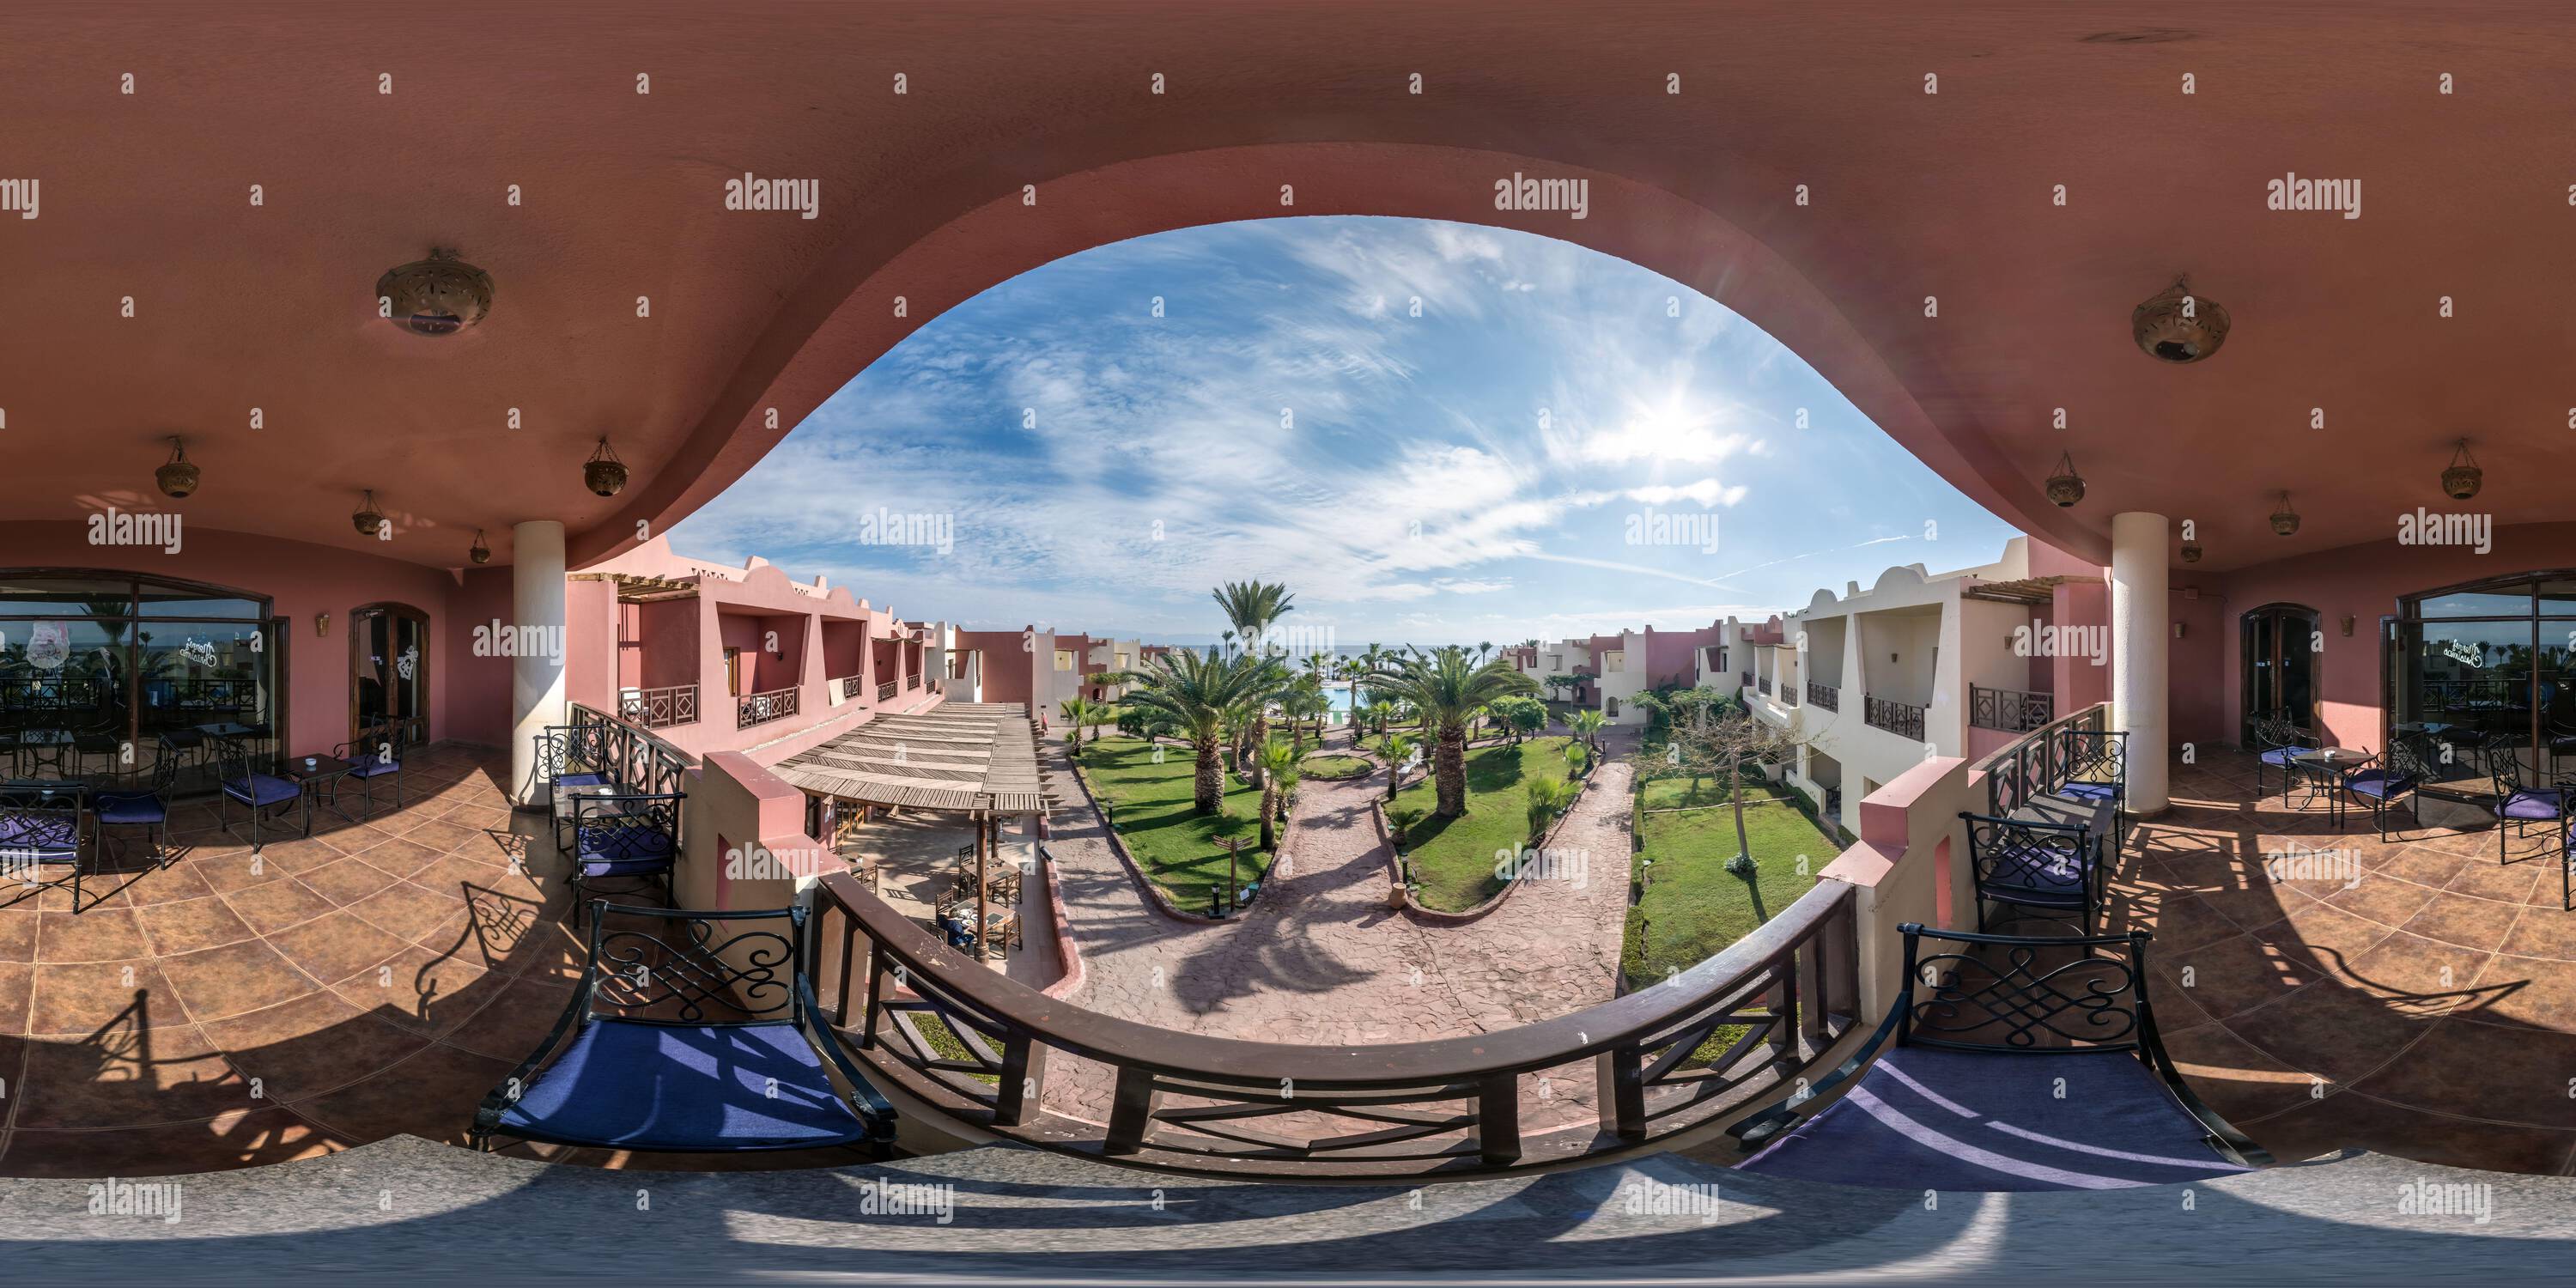 360 degree panoramic view of DAHAB, EGYPT - DECEMBER 2021: full seamless spherical hdr 360 panorama view on second floor of balcony or terrace overlooking palm trees in equirectan